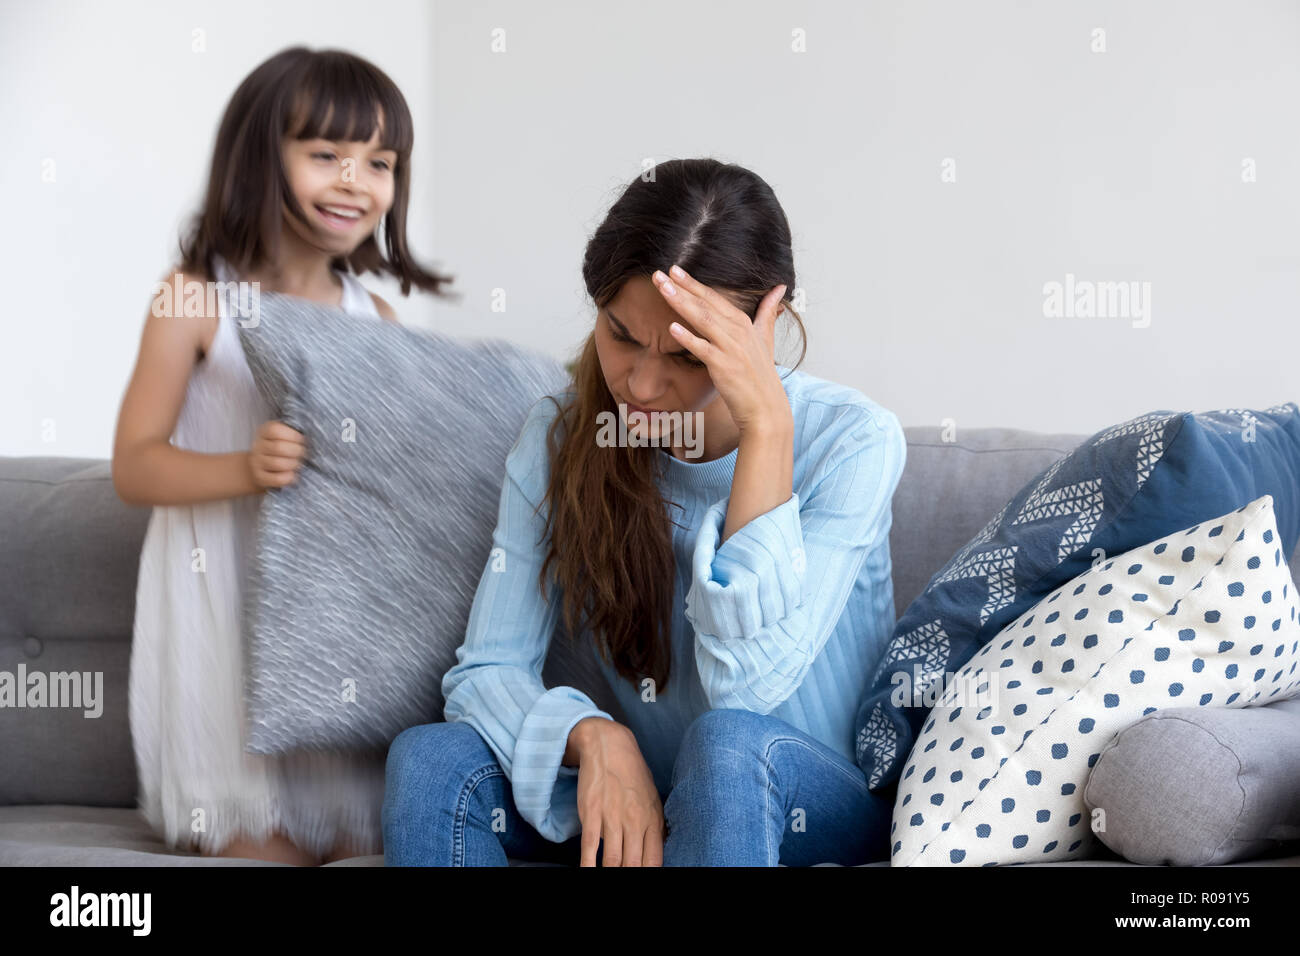 Daughter have fun play with cushion her mother feels unwell Stock Photo